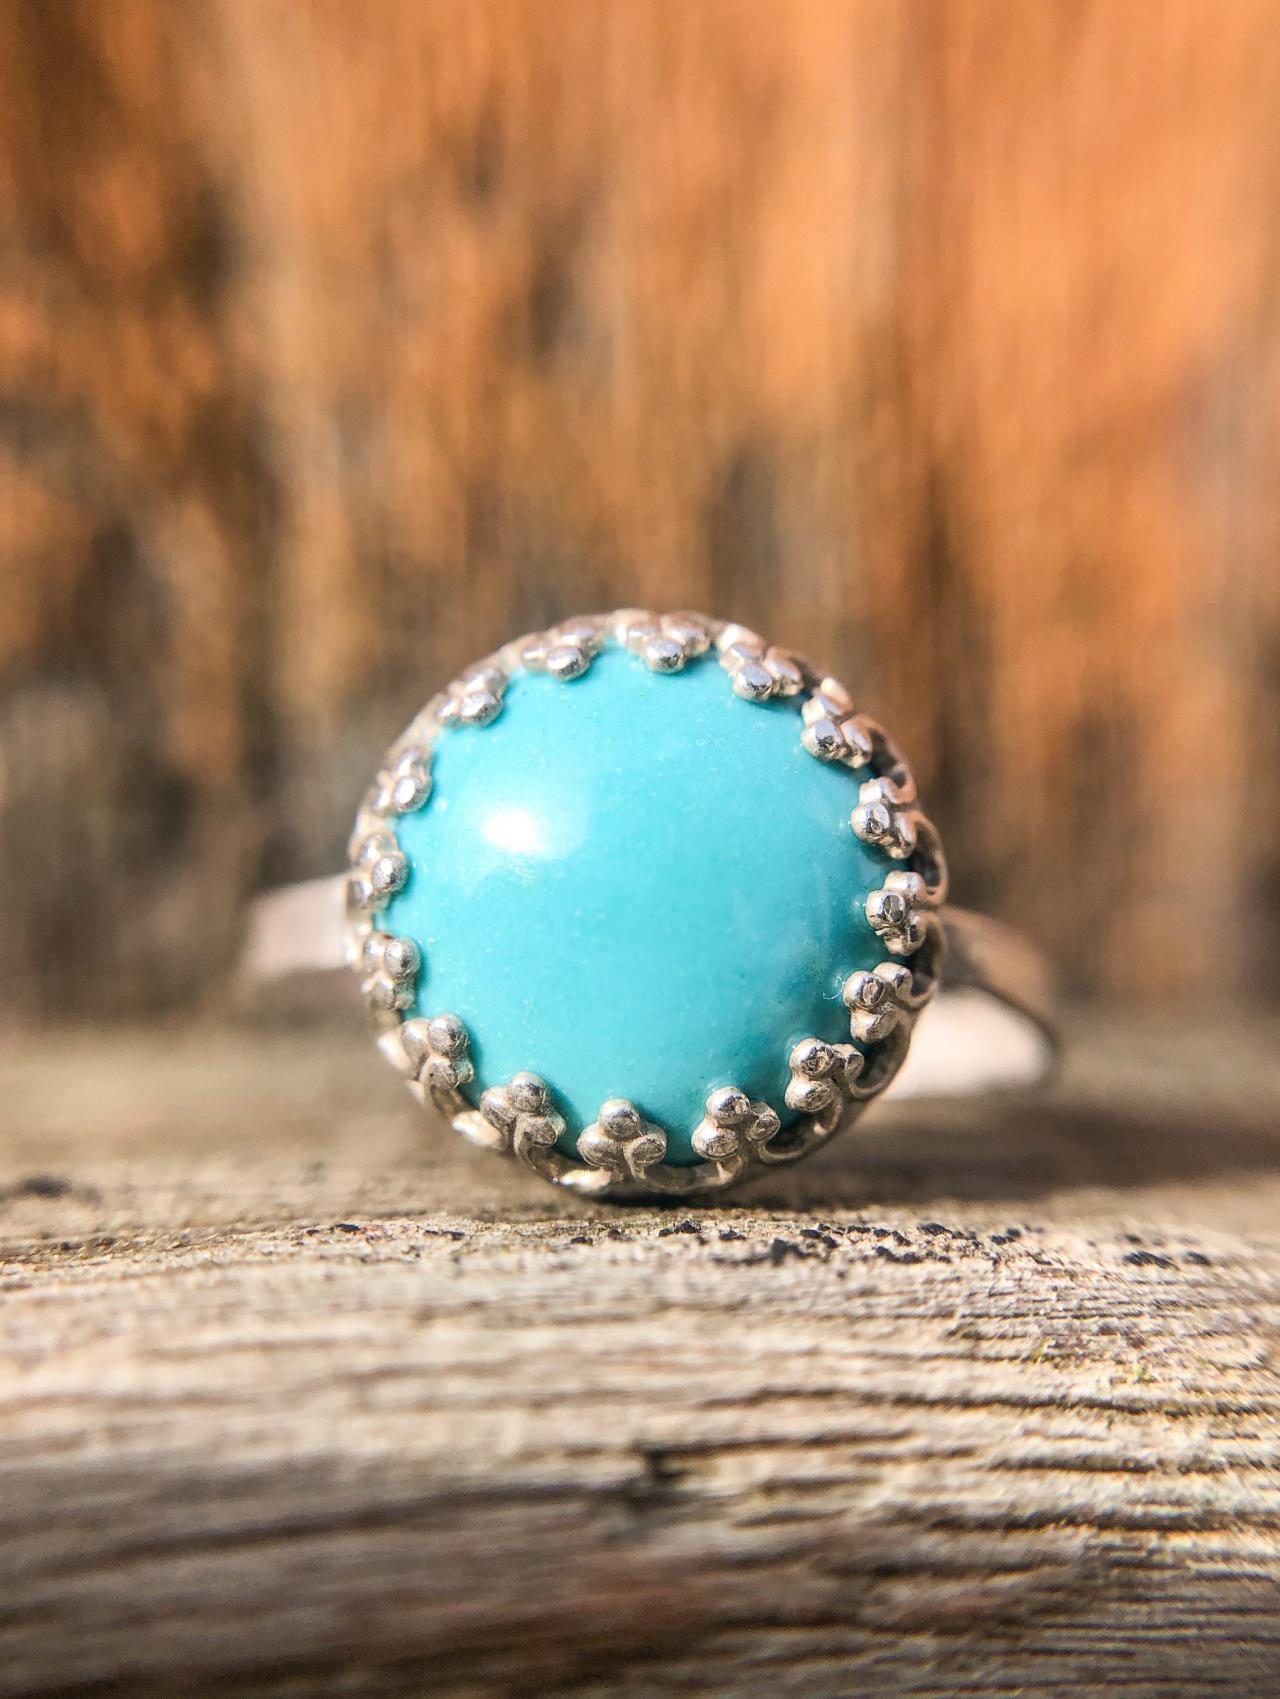 Solid Sterling Silver With Sleeping Beauty Turquoise Ring, Size 7.5, Solid 925 Silver